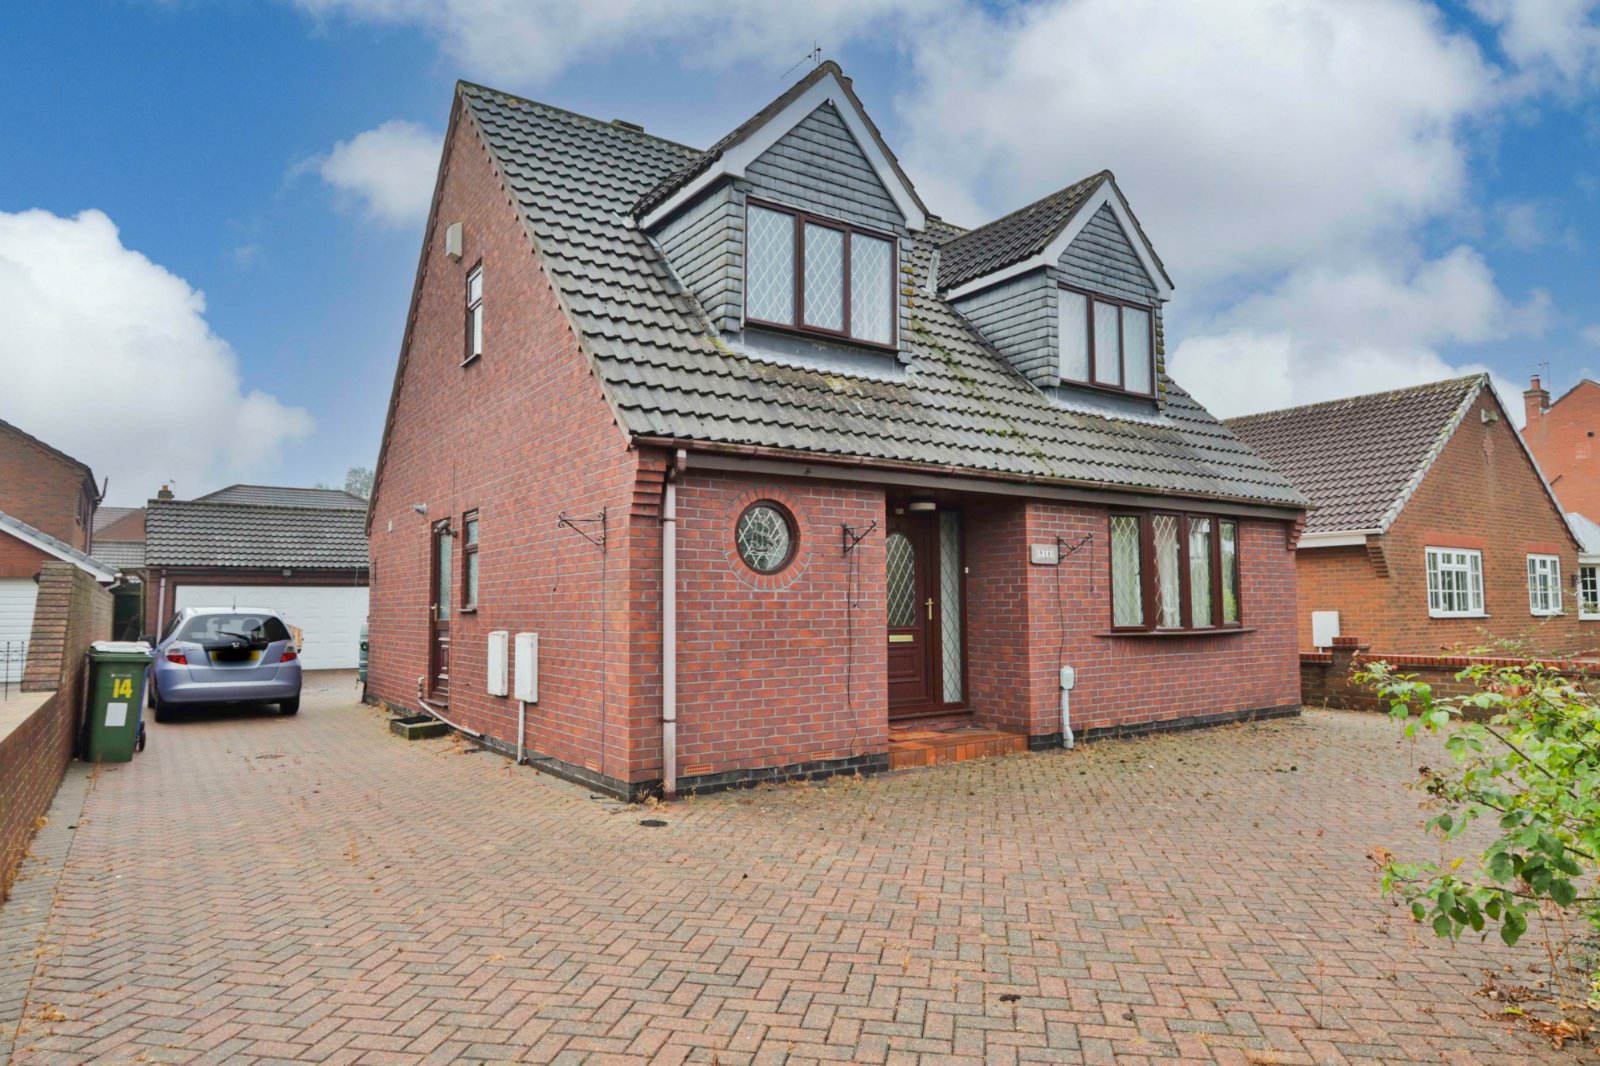 2 bed house for sale in Bond Street, Hedon, HU12